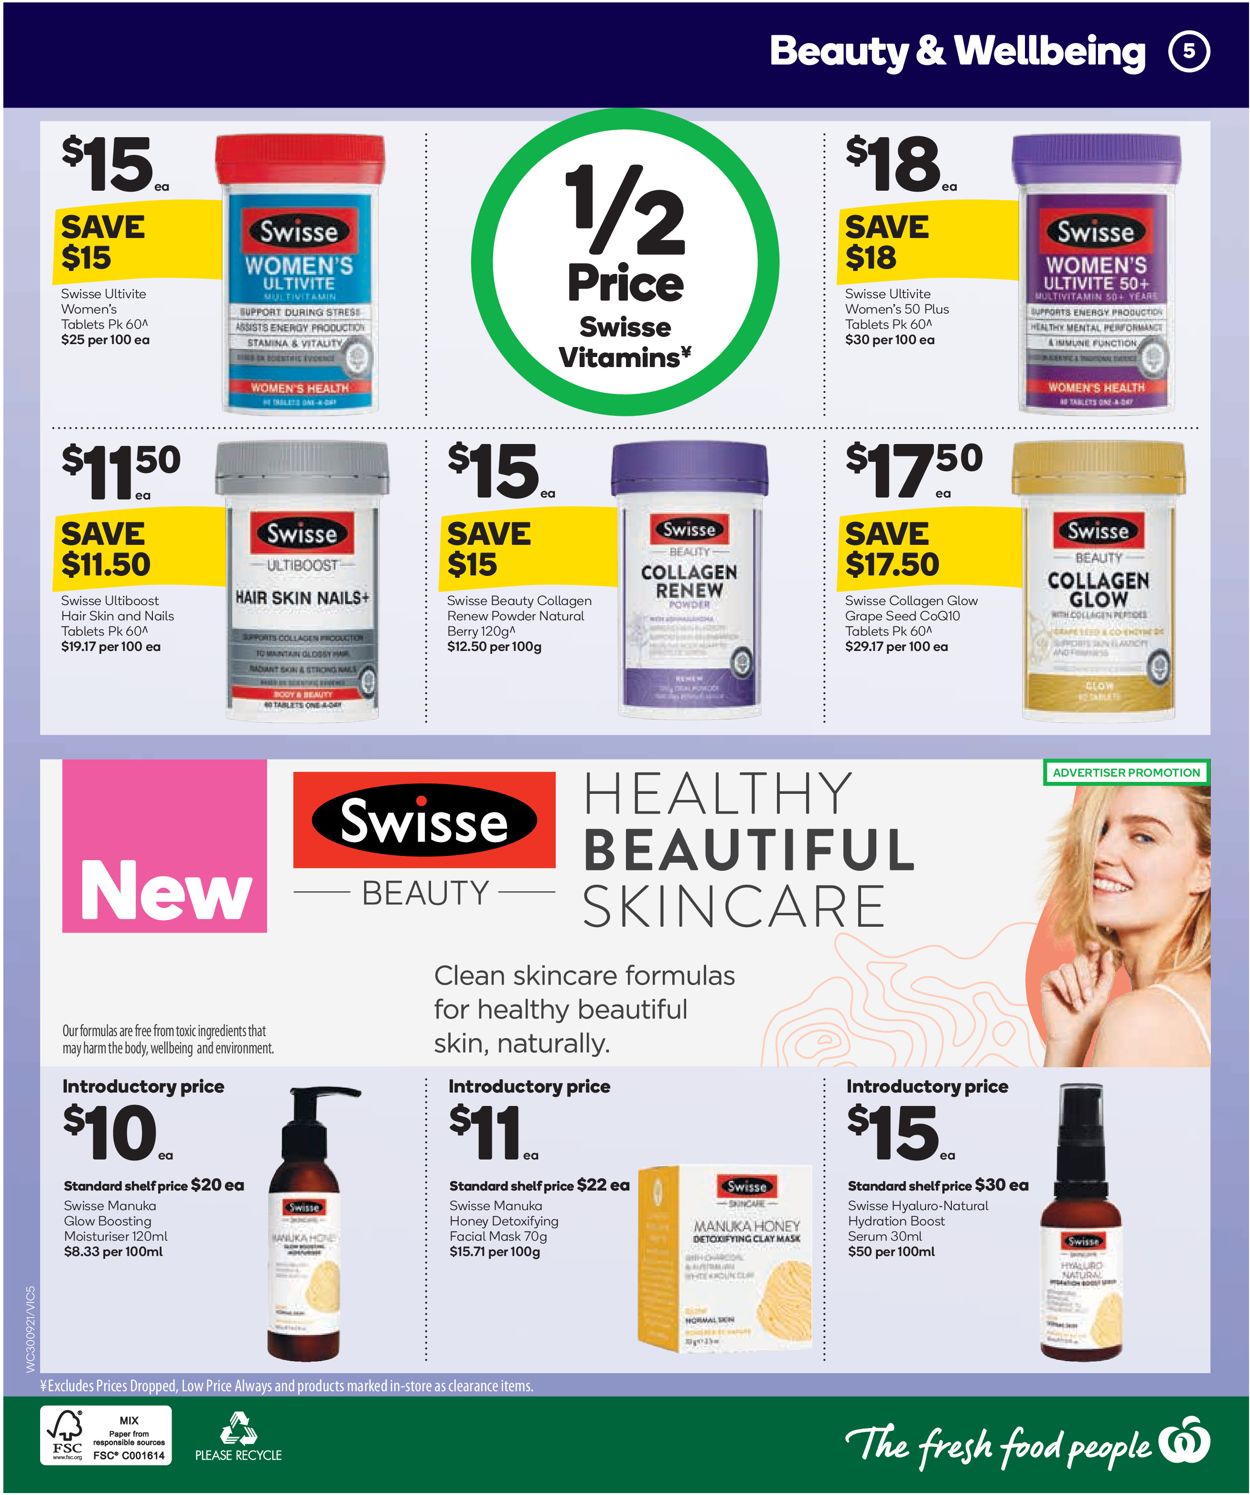 Woolworths Catalogue from 30/09/2020